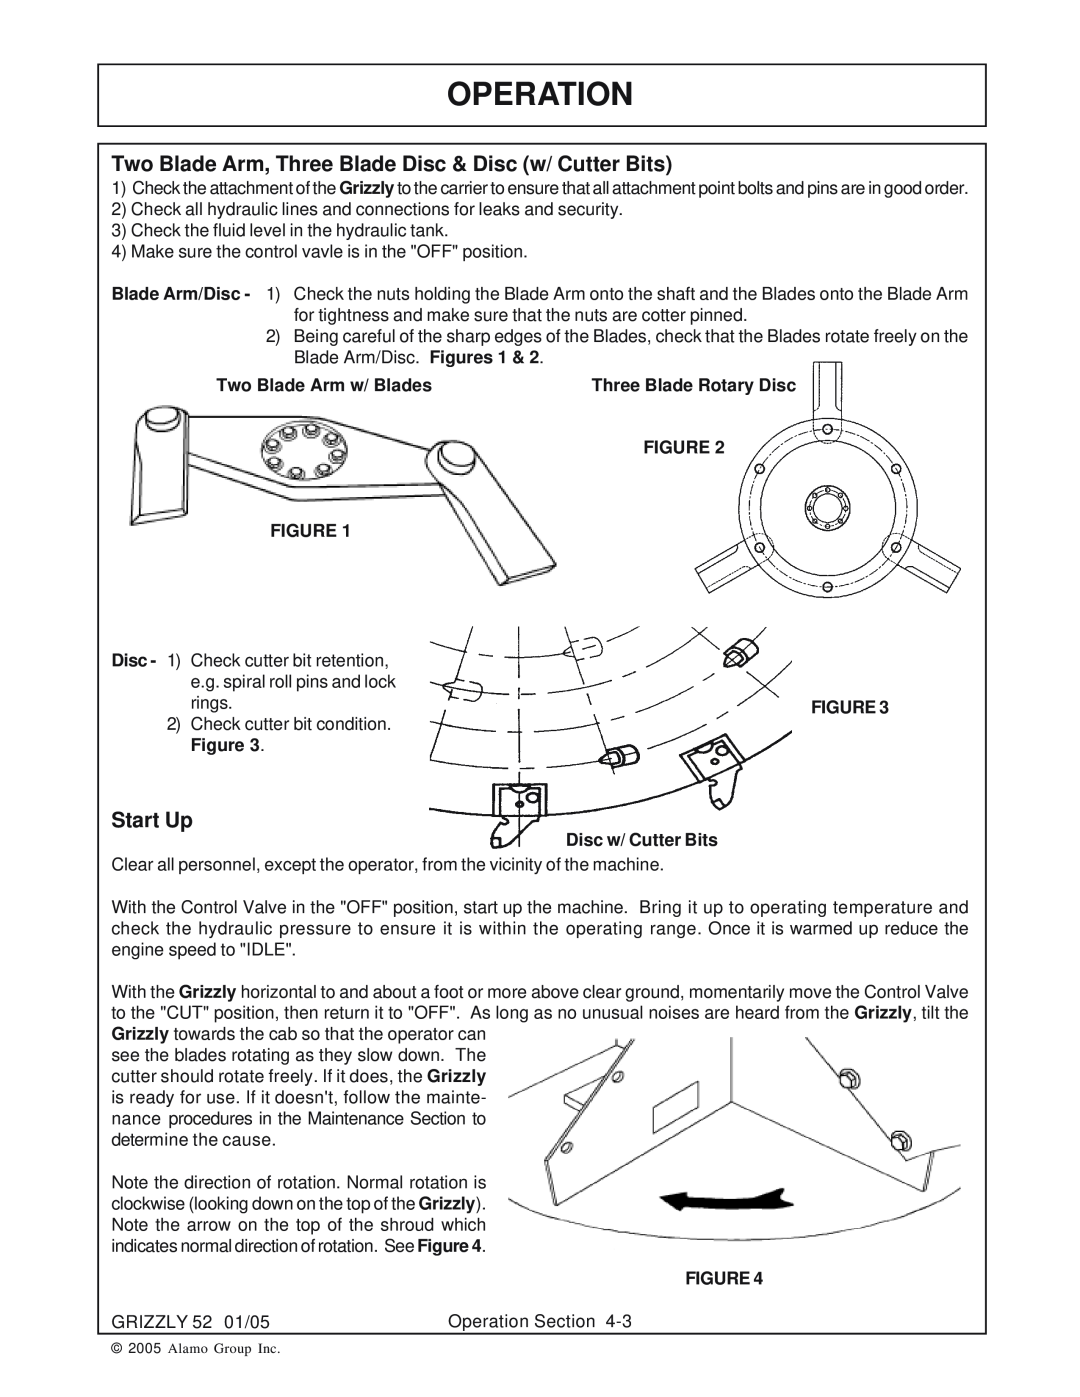 Grizzly 52 manual Operation, Two Blade Arm w/ Blades, Three Blade Rotary Disc, Disc w/ Cutter Bits 